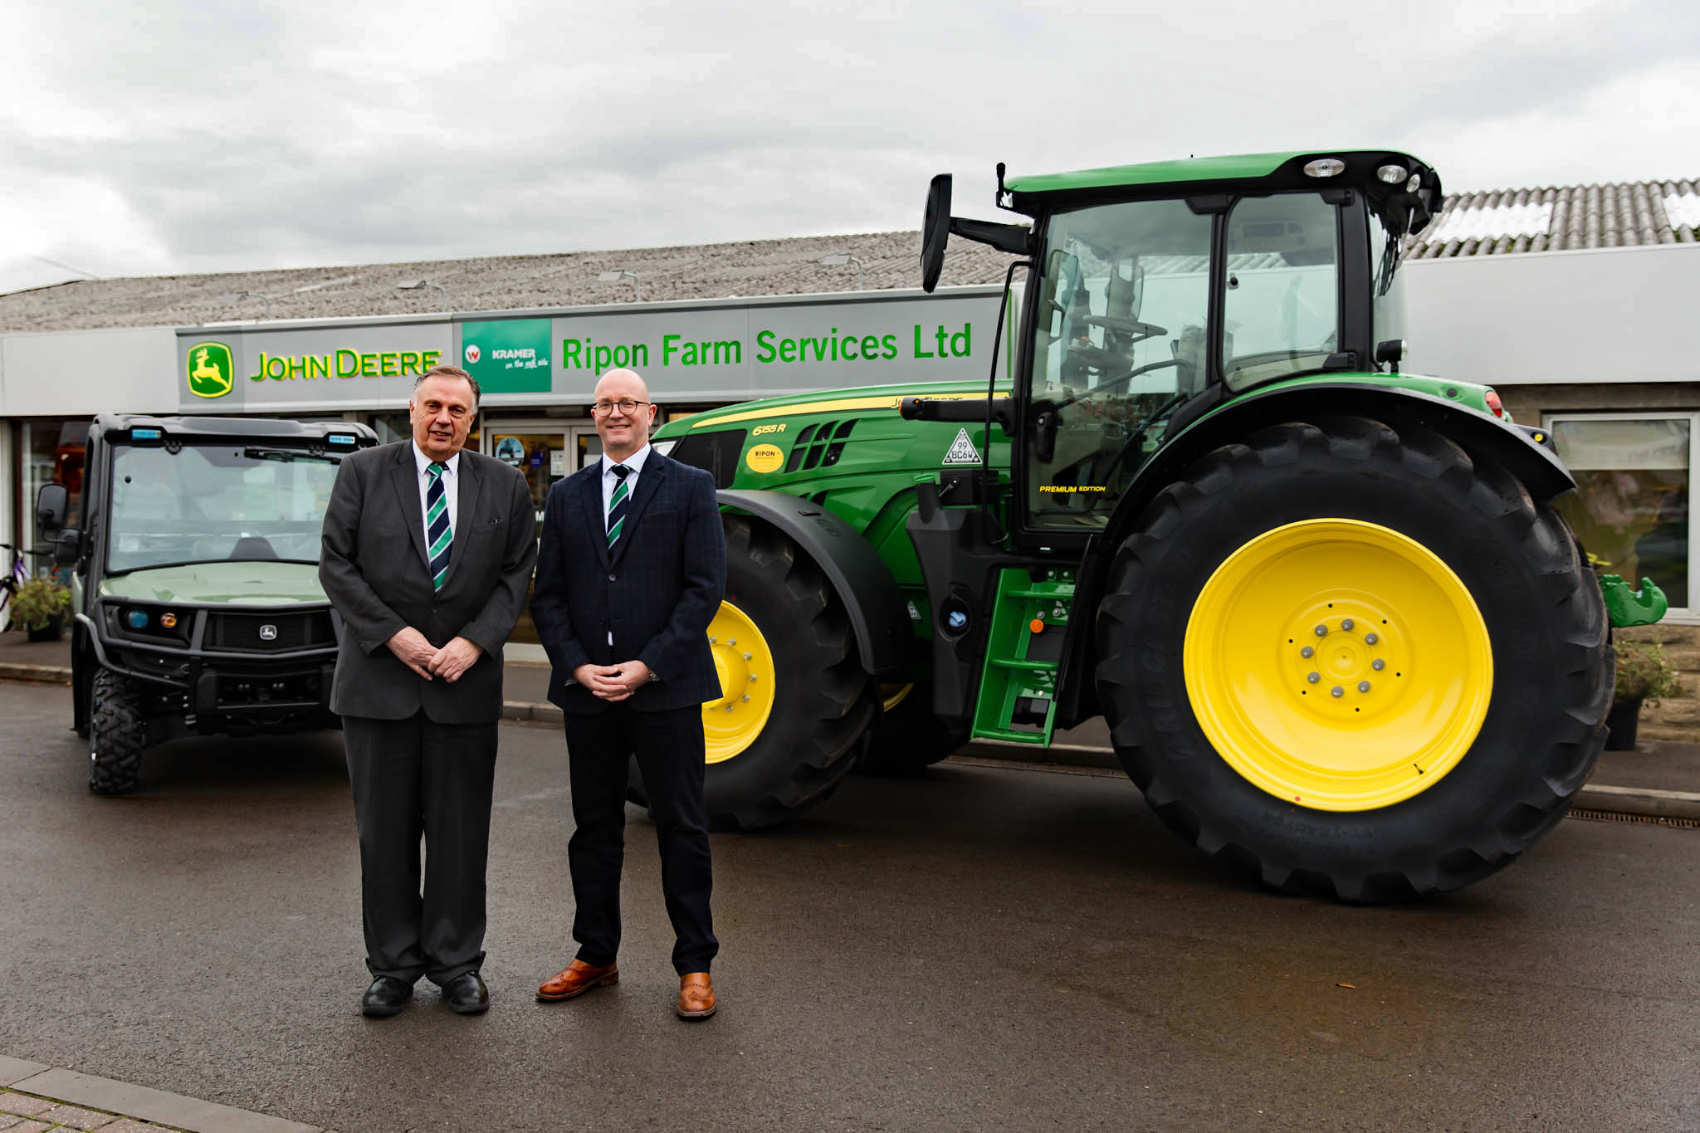 Geoff Brown and Richard Simpson of Ripon Farm Services